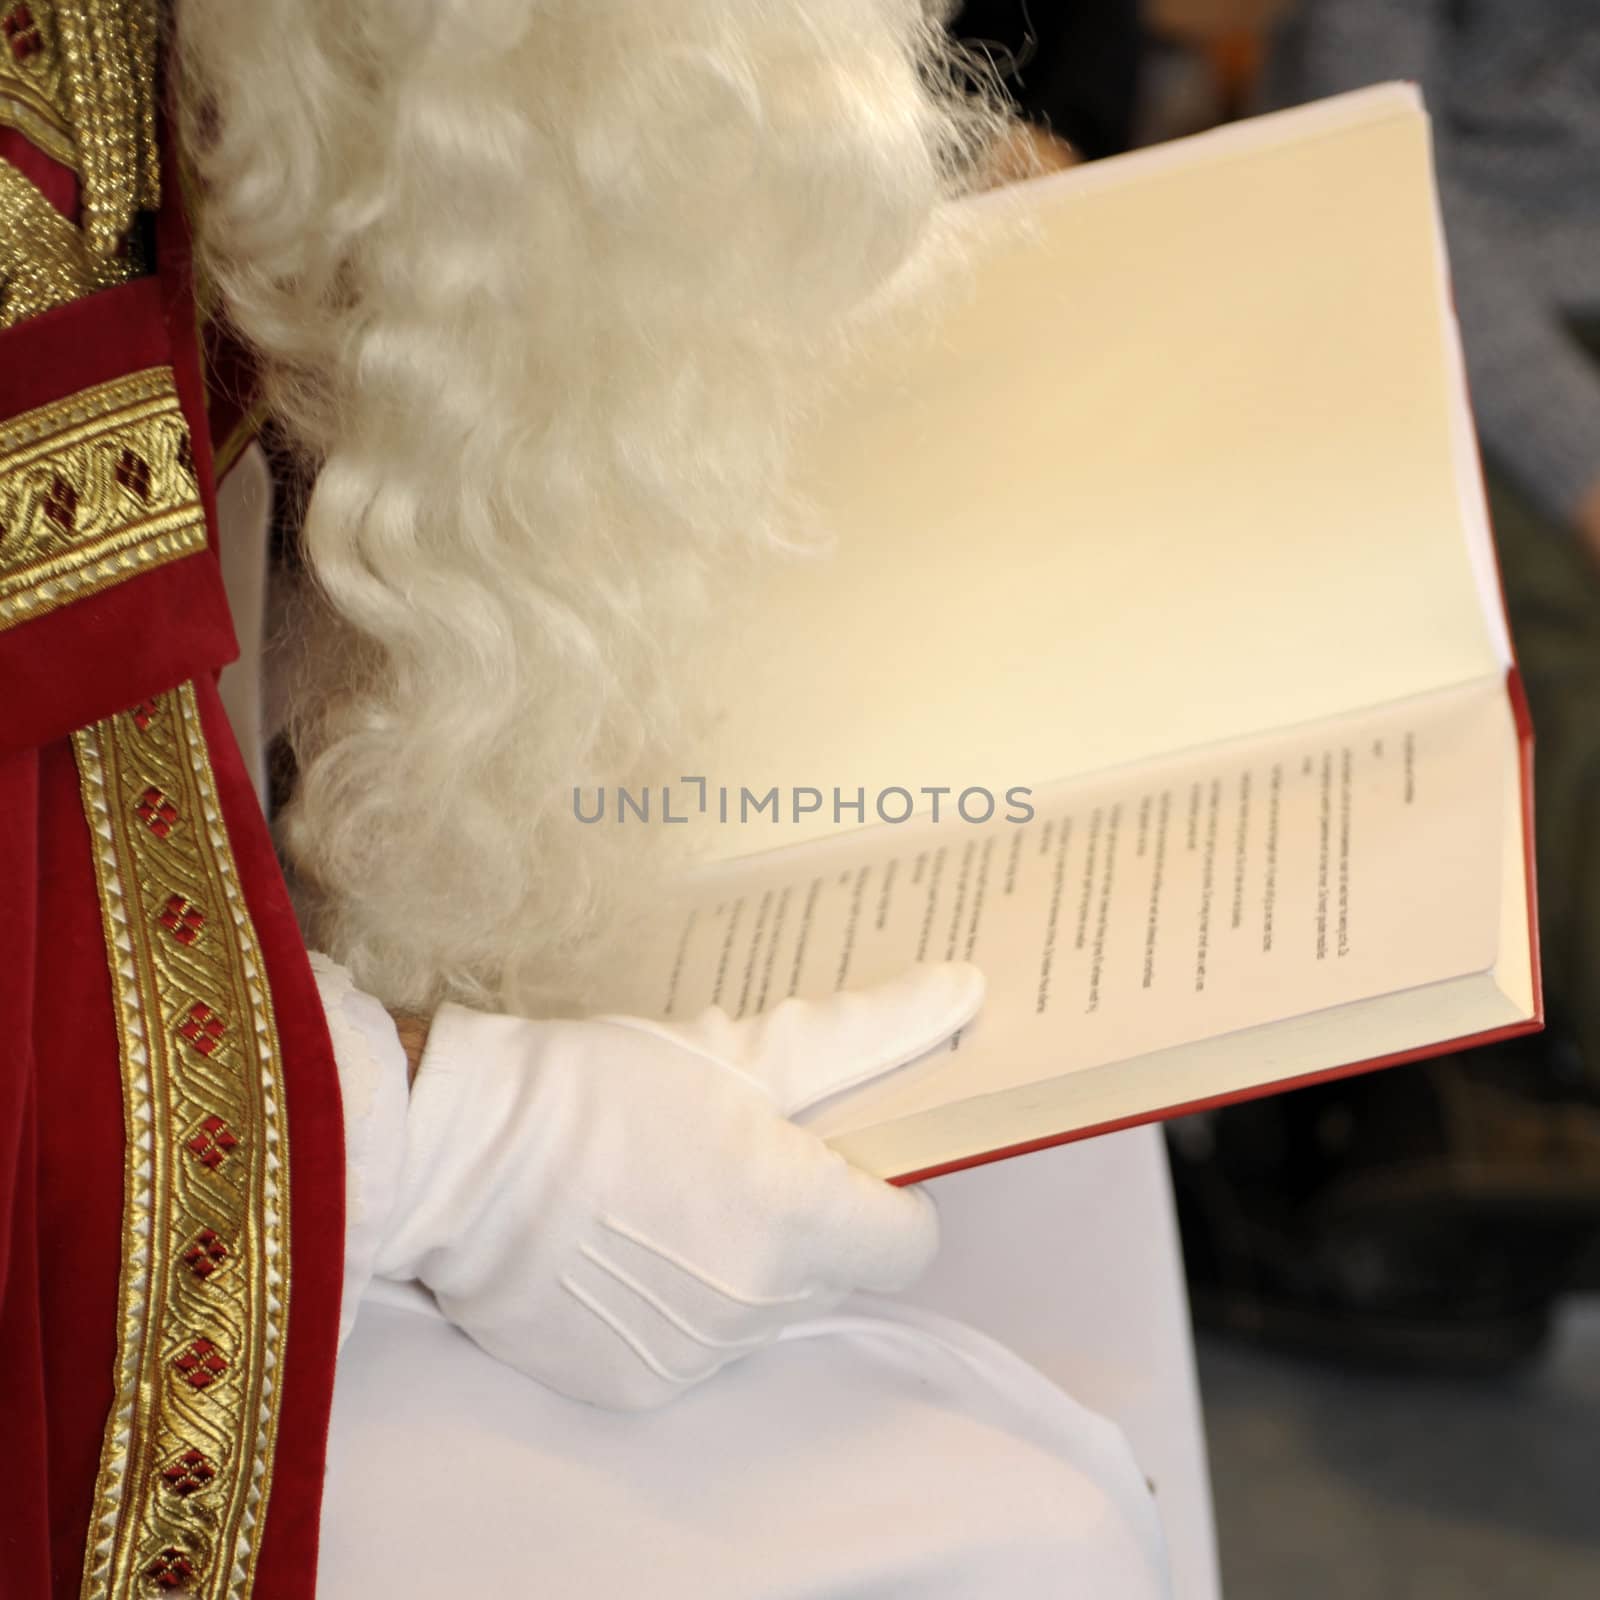 a closeup of the big book of "Sinterklaas", a dutch tradition on the 5th of December